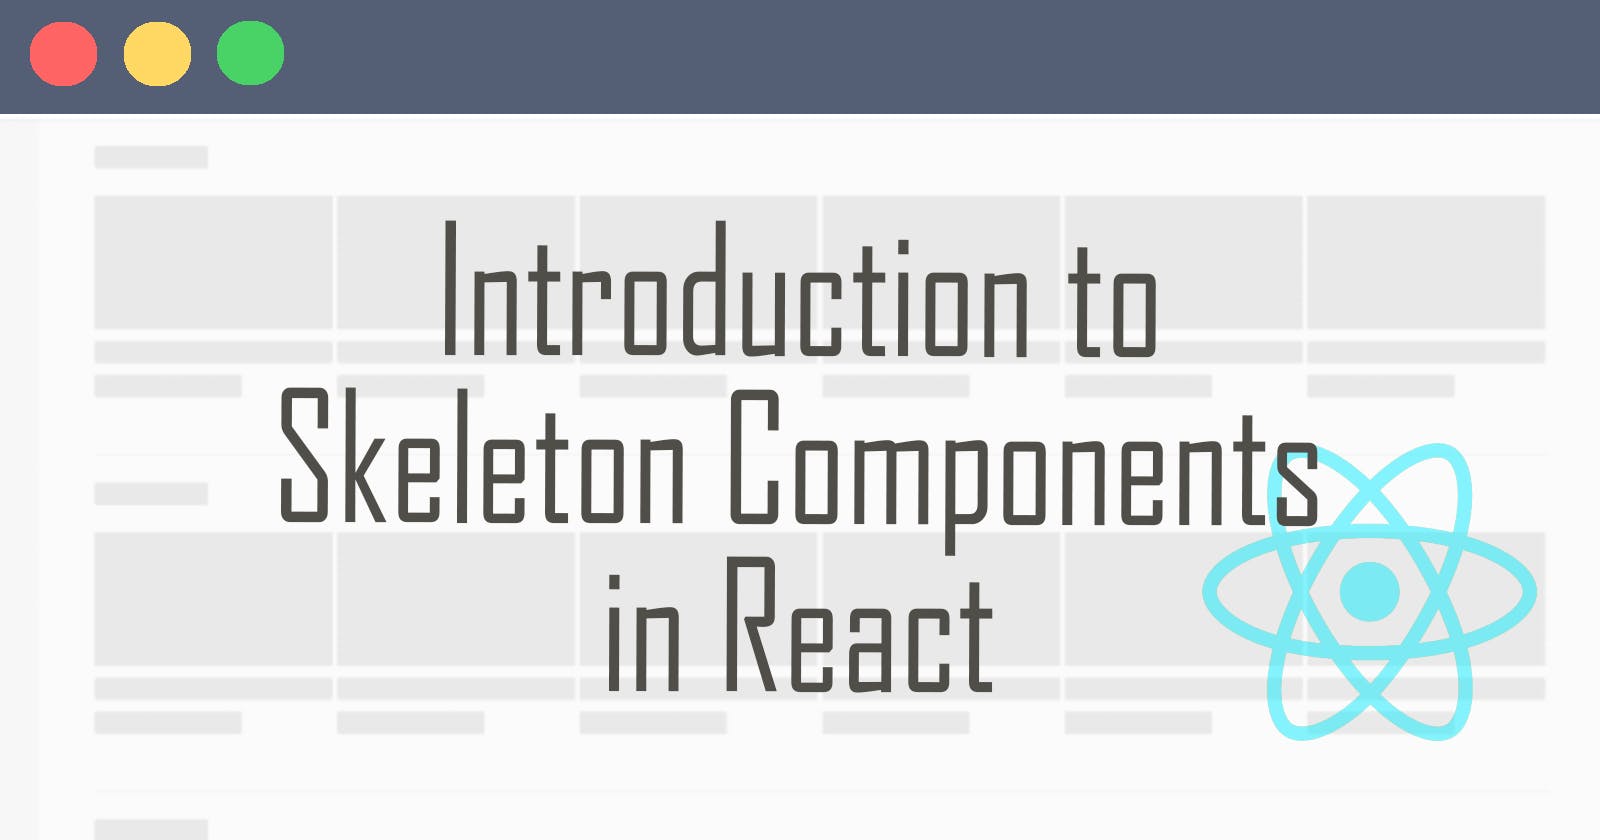 3 Ways to Implement Skeleton Components in React